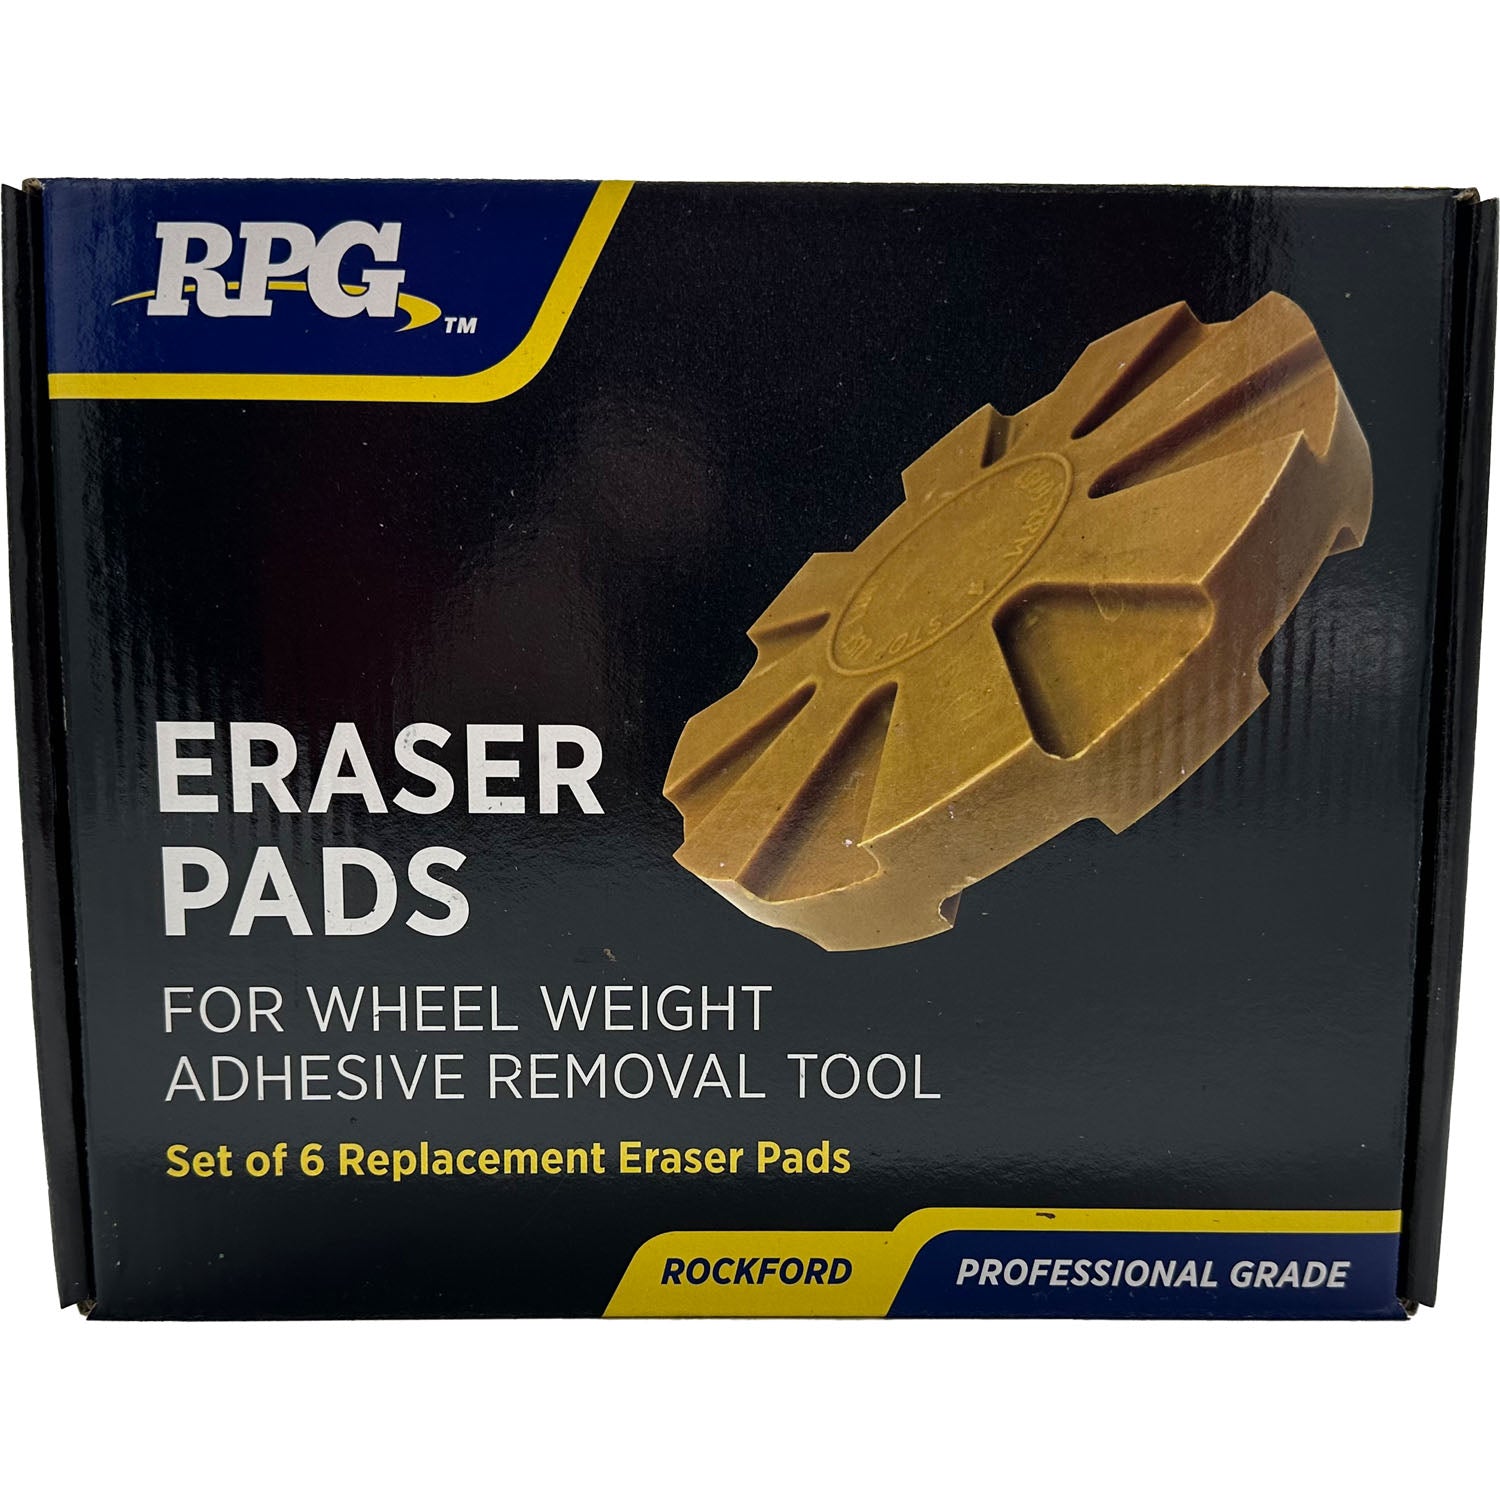 RPG Replacement Eraser Pad for A143252 Adhesive Wheel Weight Remover P